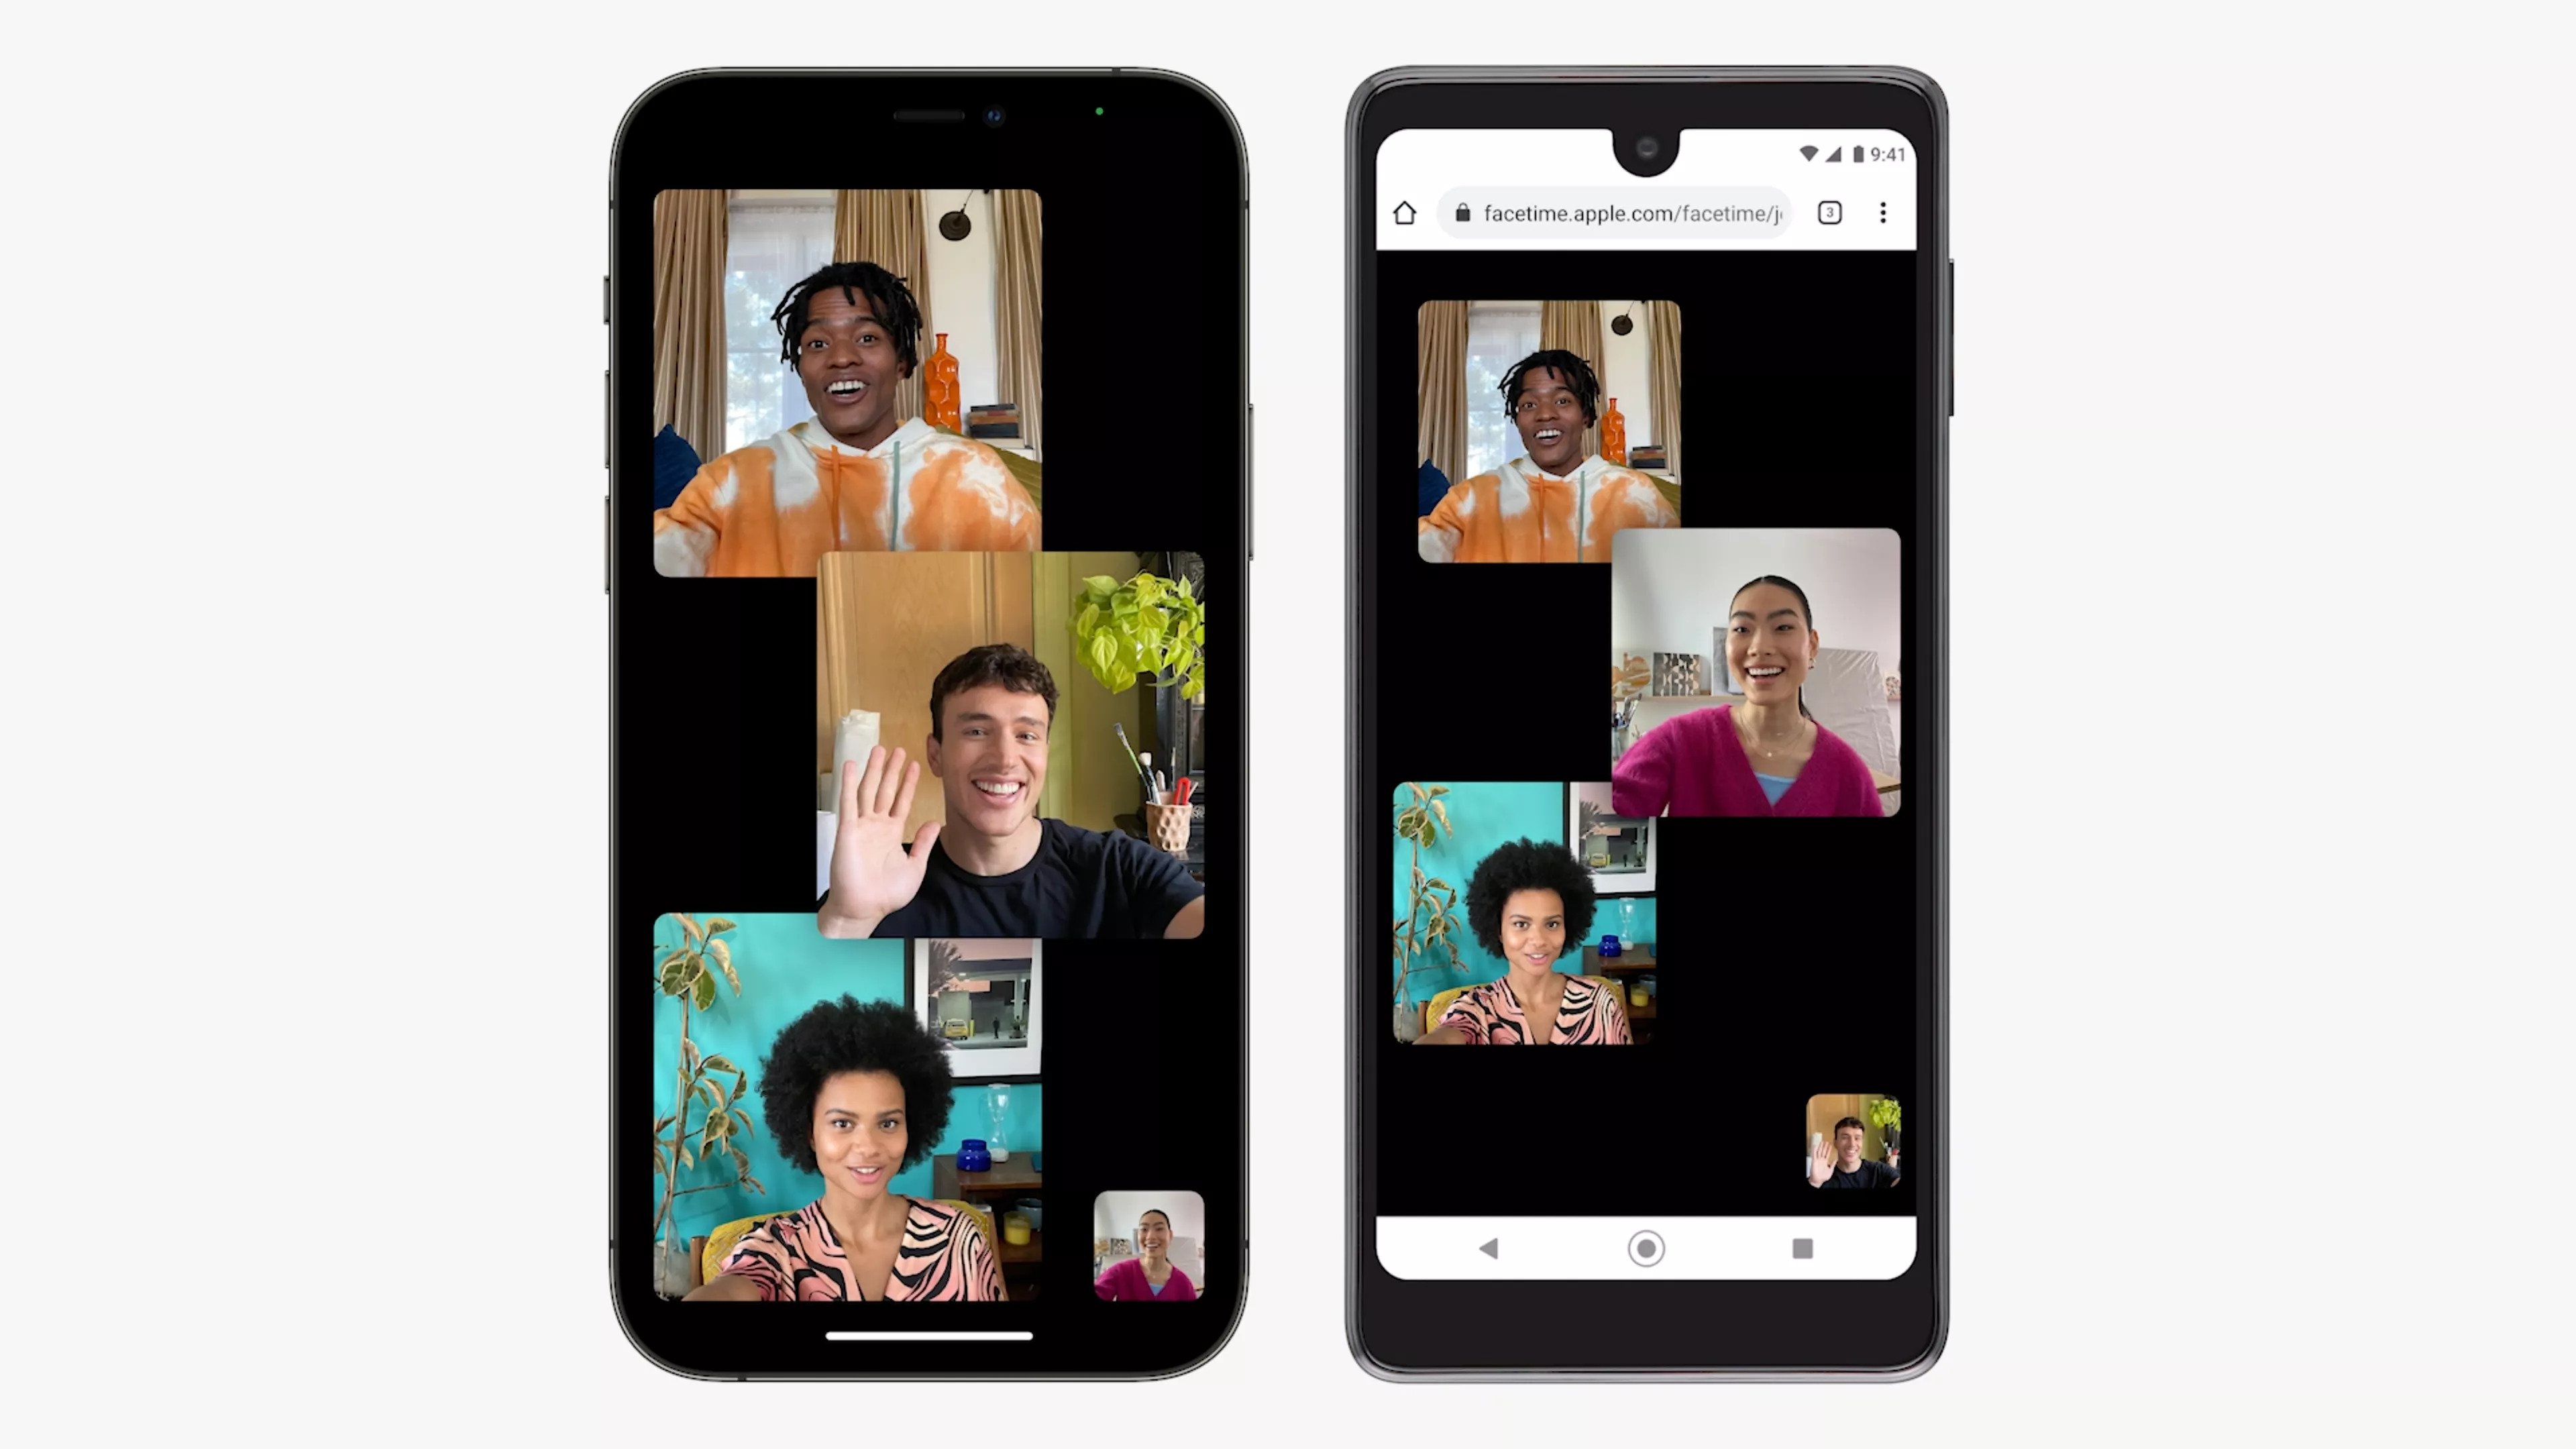 You no longer need an iPhone to FaceTime. How to use it on Android or Windows